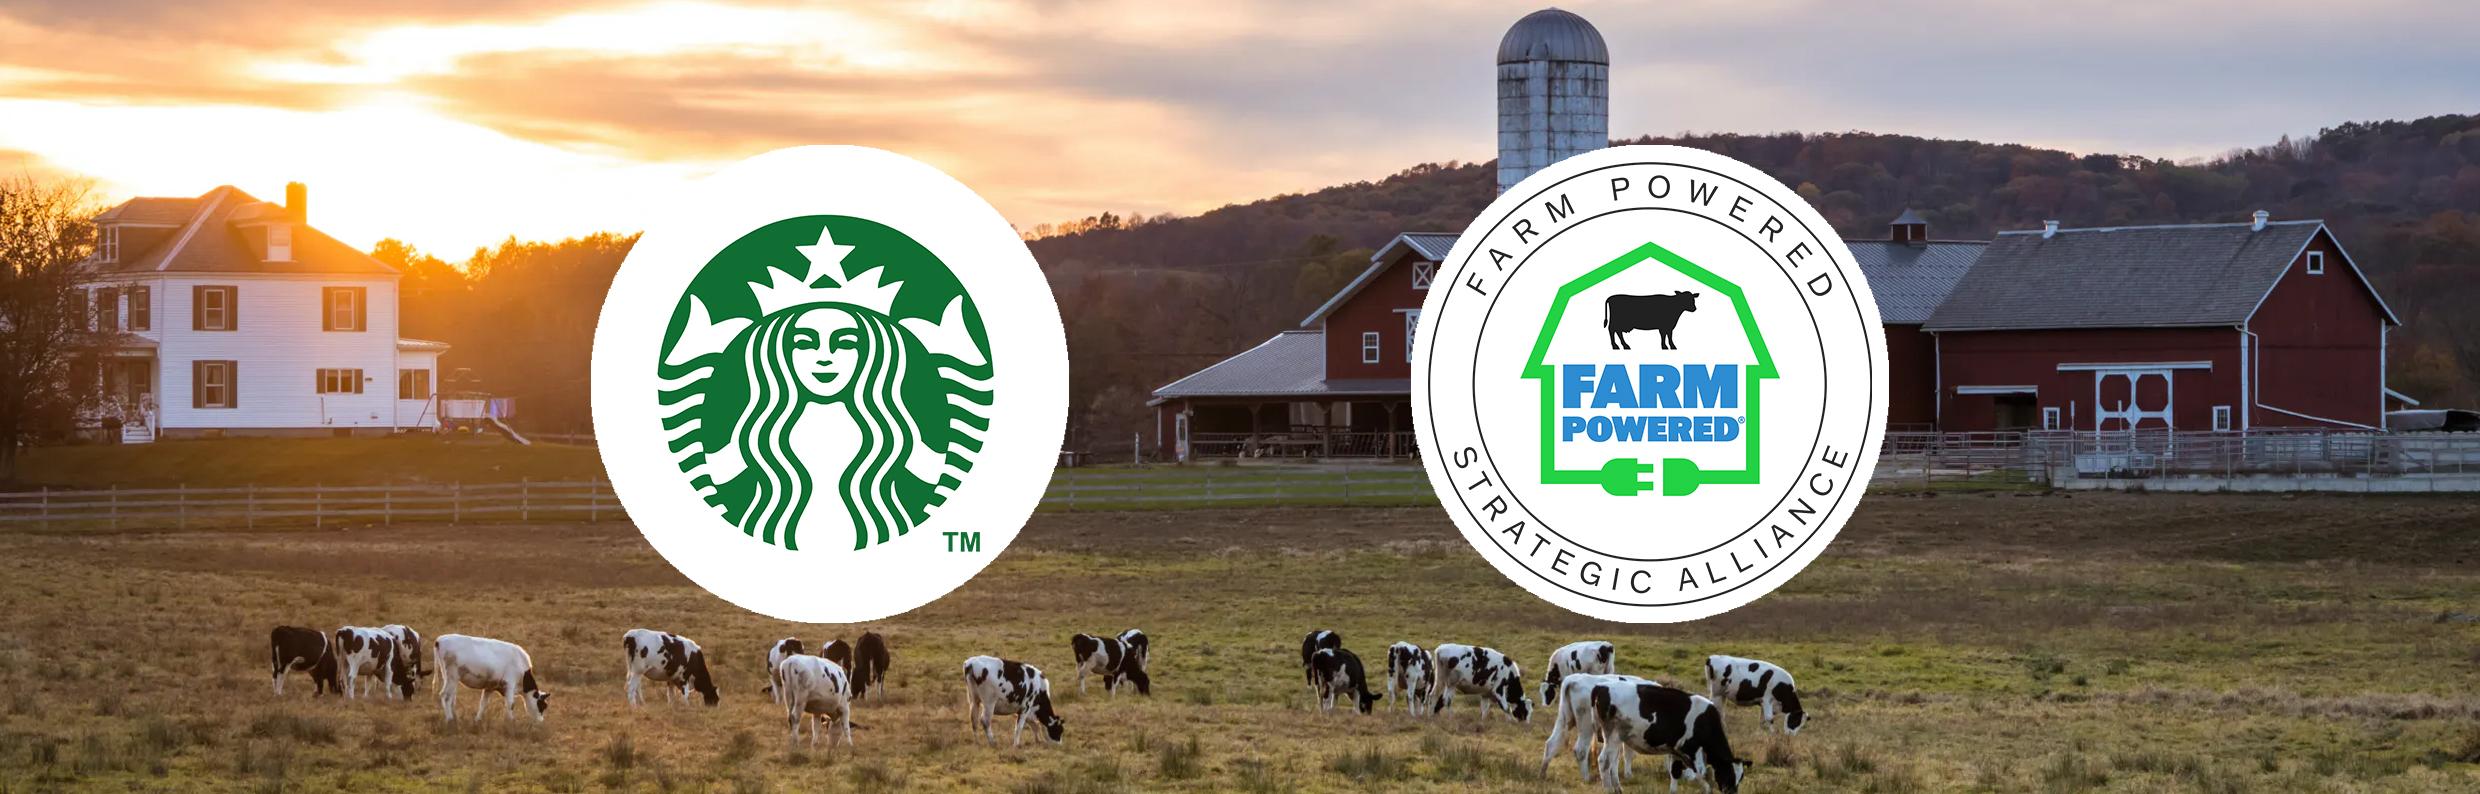 Logos of Starbucks and Farm Powered Strategic Alliance, with a background image of a farm using anaerobic digestion